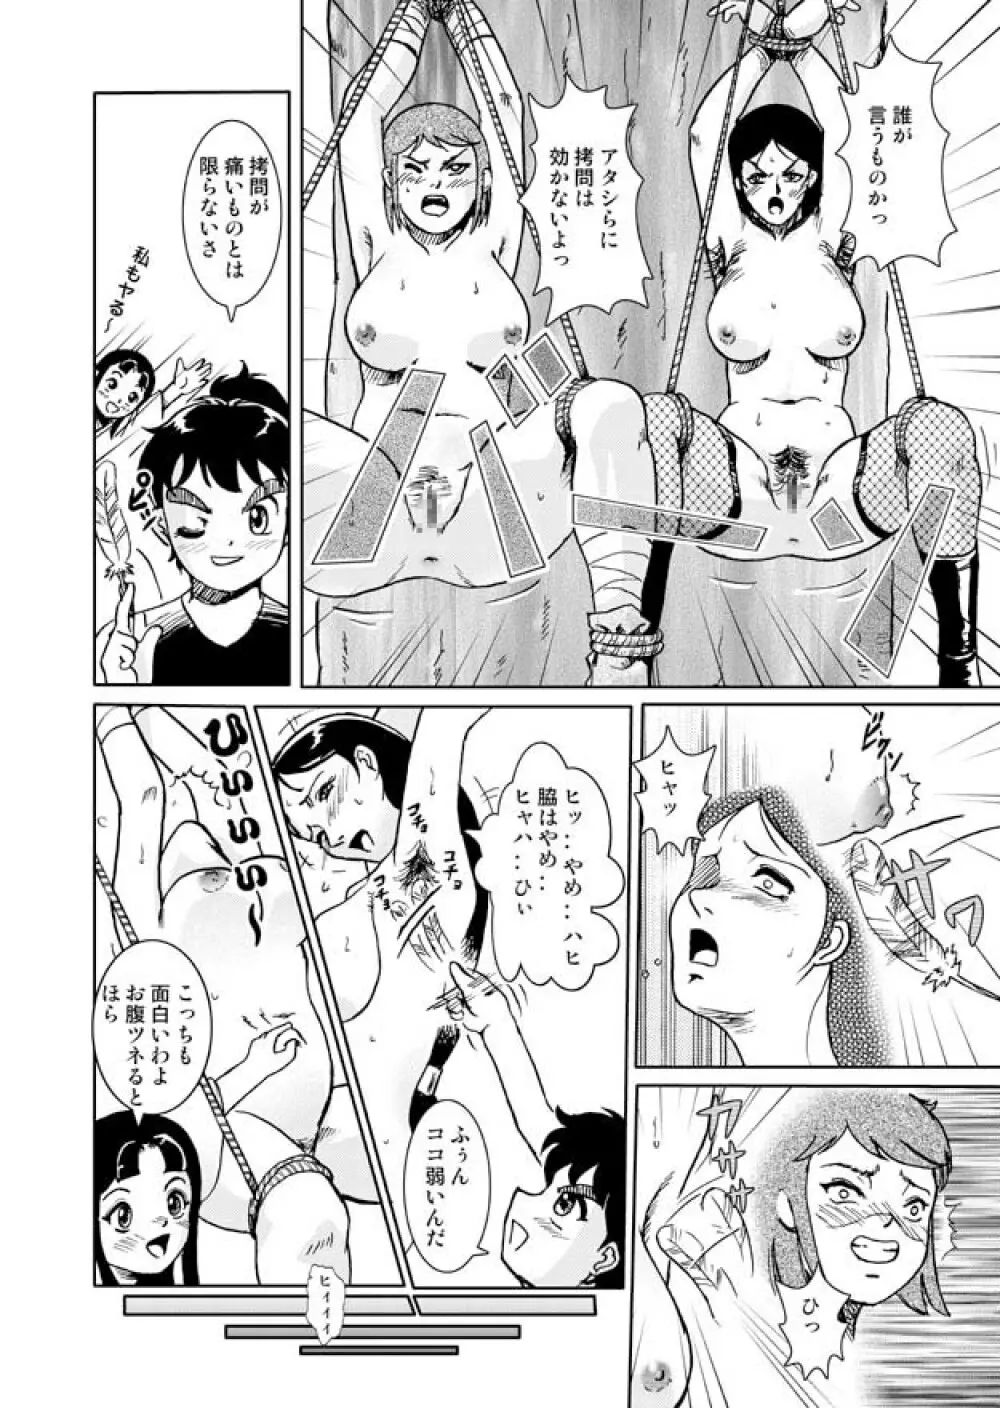 Same-themed manga about kid fighting female ninjas from japanese imageboard. Page.15